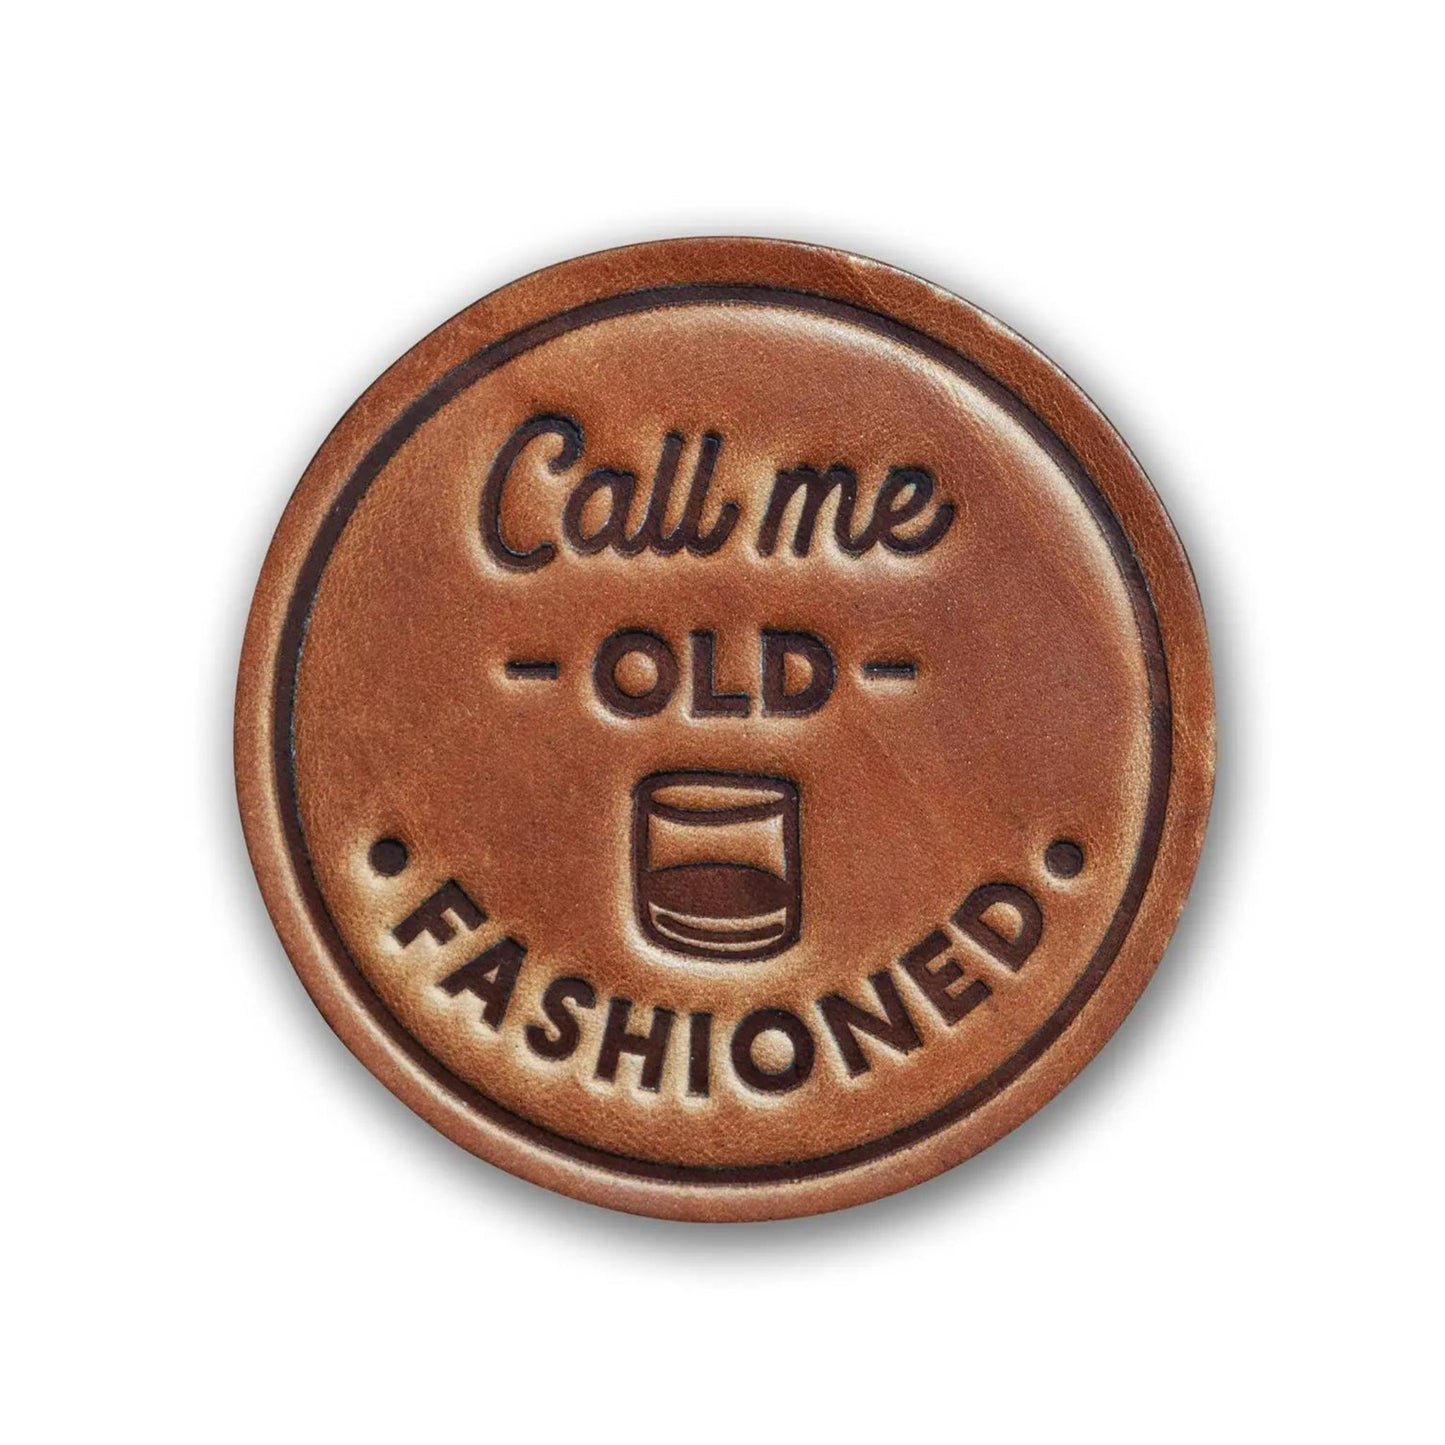 "Call Me Old Fashioned" Leather Coaster cut and pressed by hand from some of the thickest and finest harness leather available.